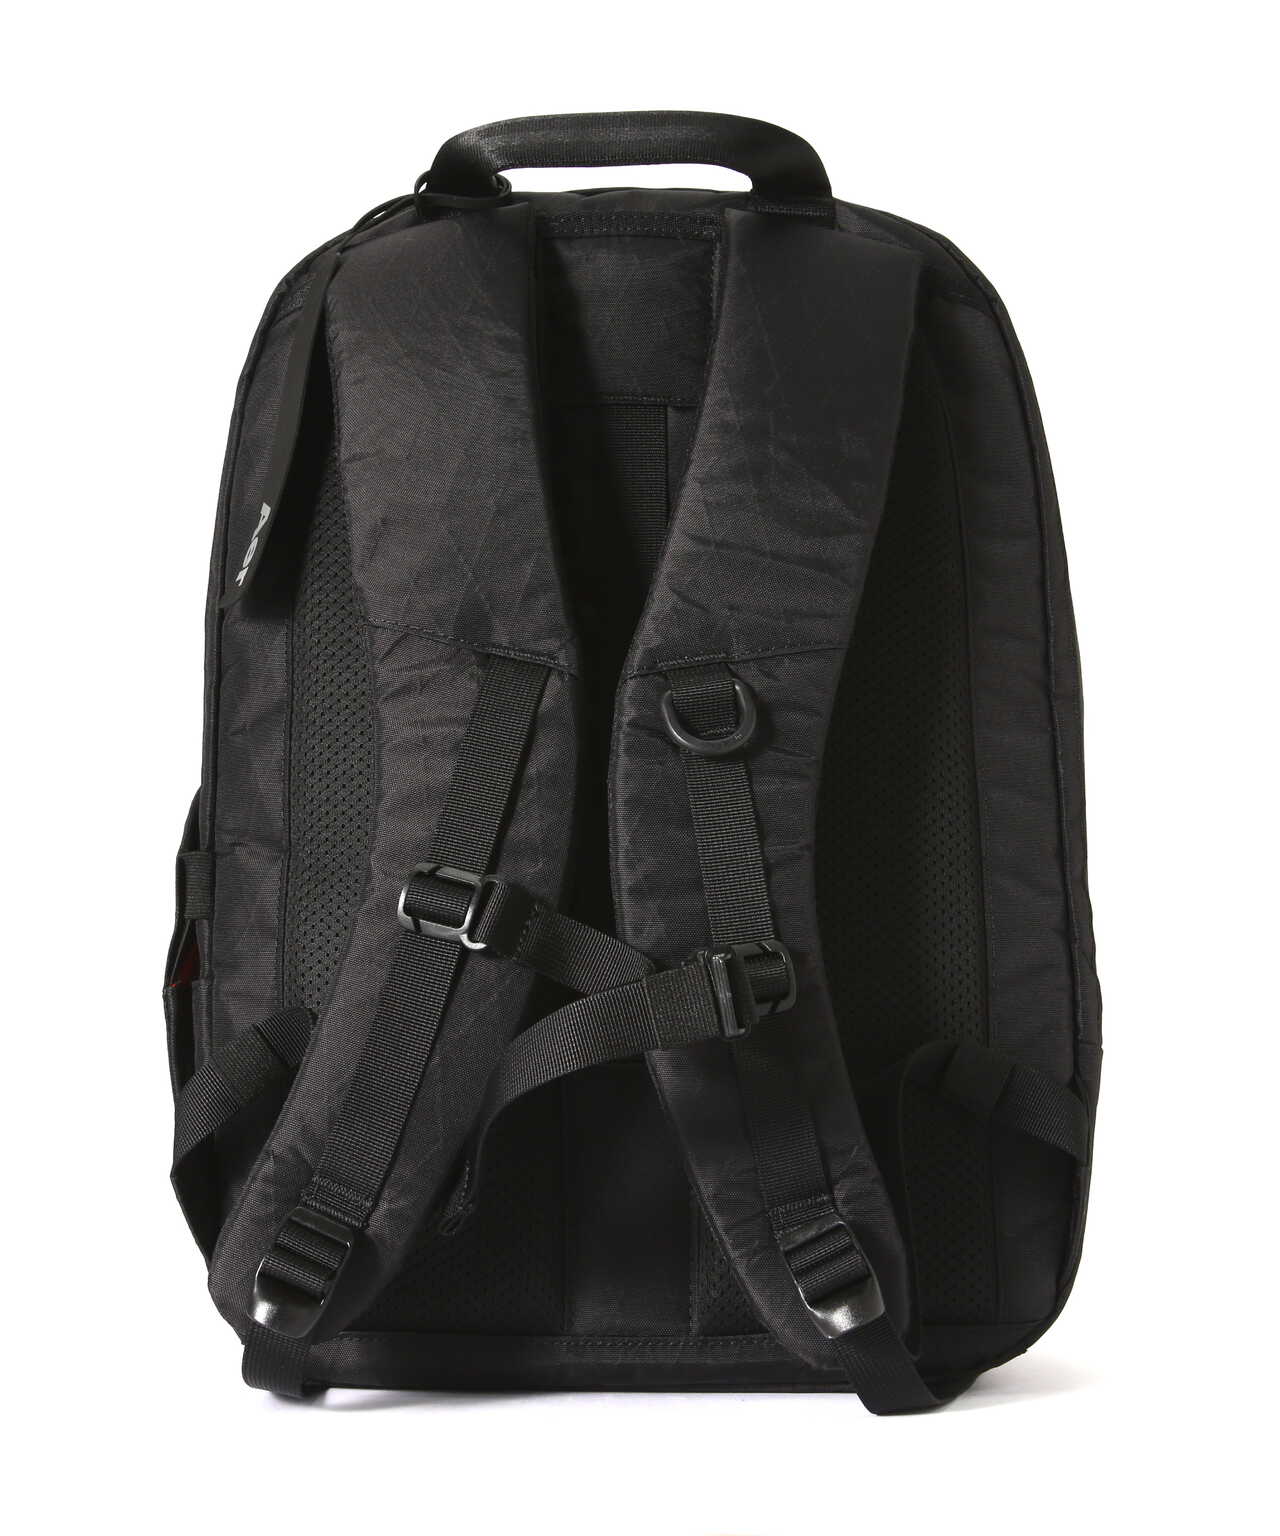 Aer（エアー）Day Pack2 X-PAC AER-91008 高耐水・高耐久バッグ 正規 